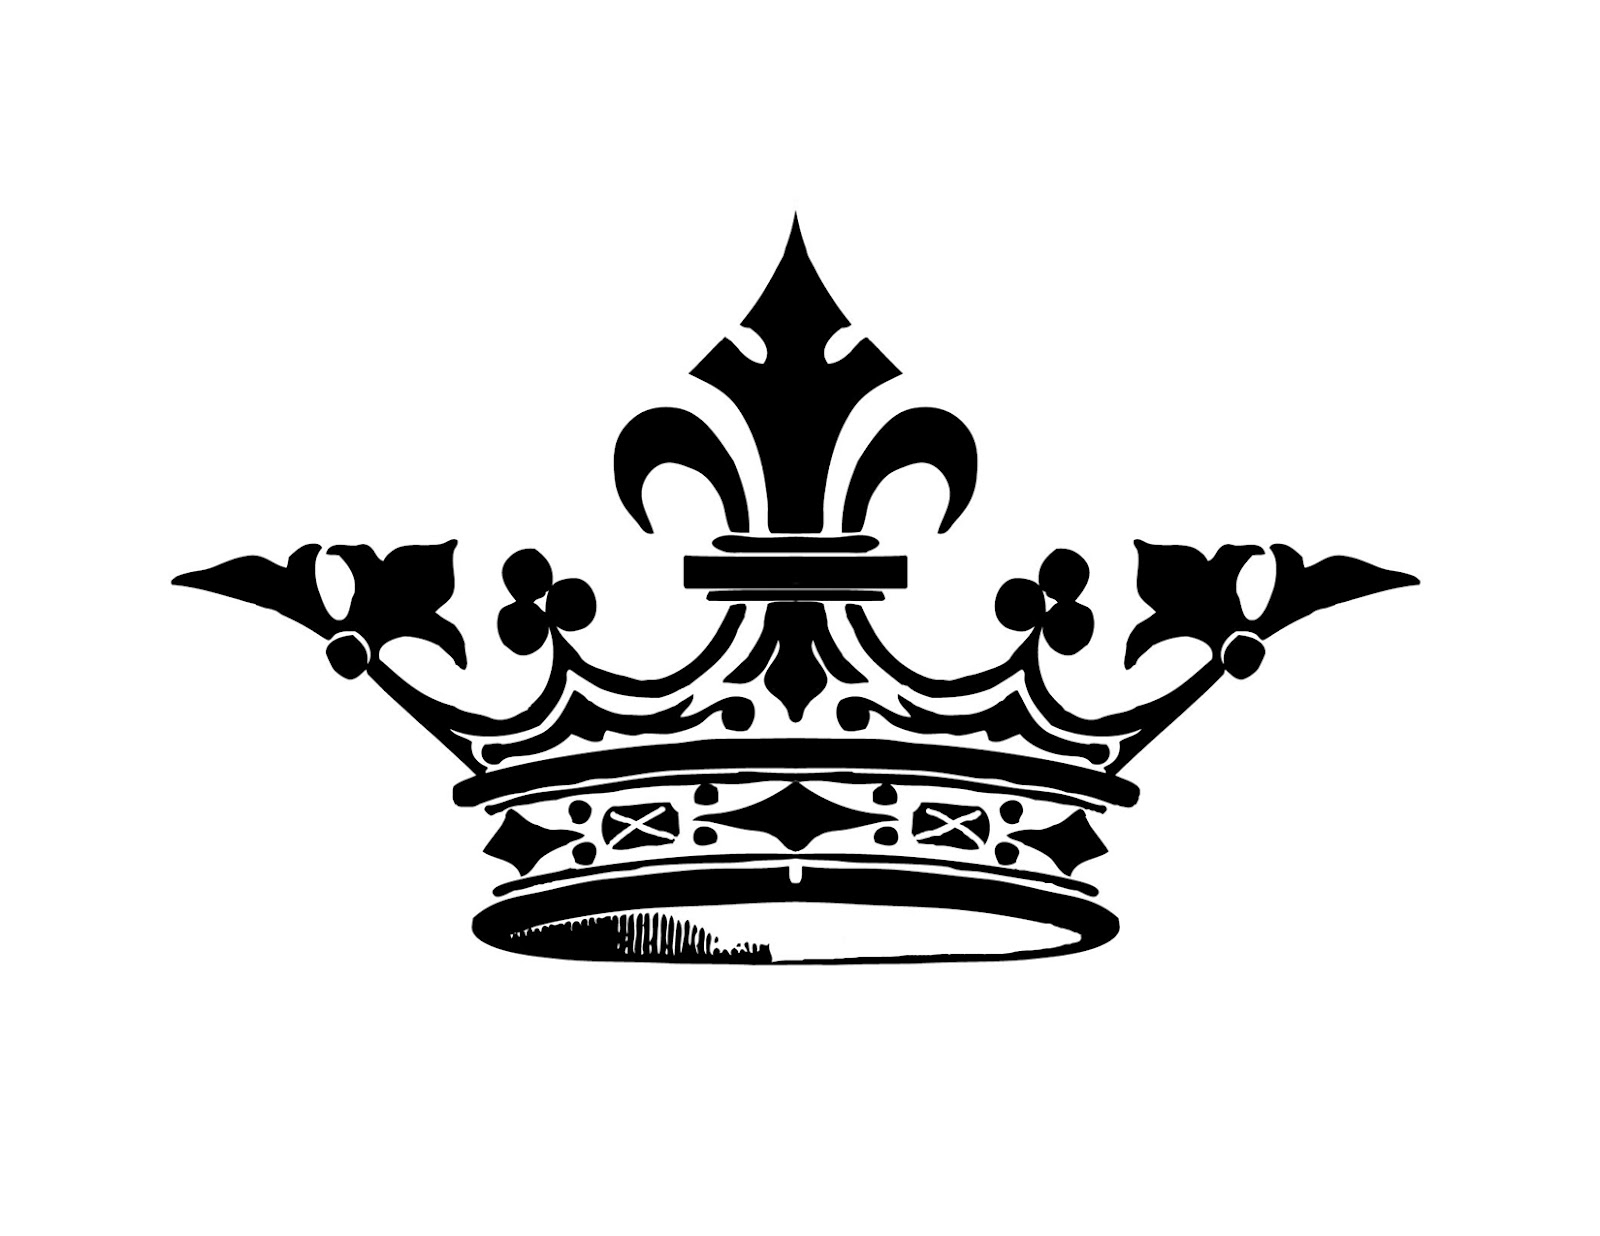 1000+ images about crown tattoo